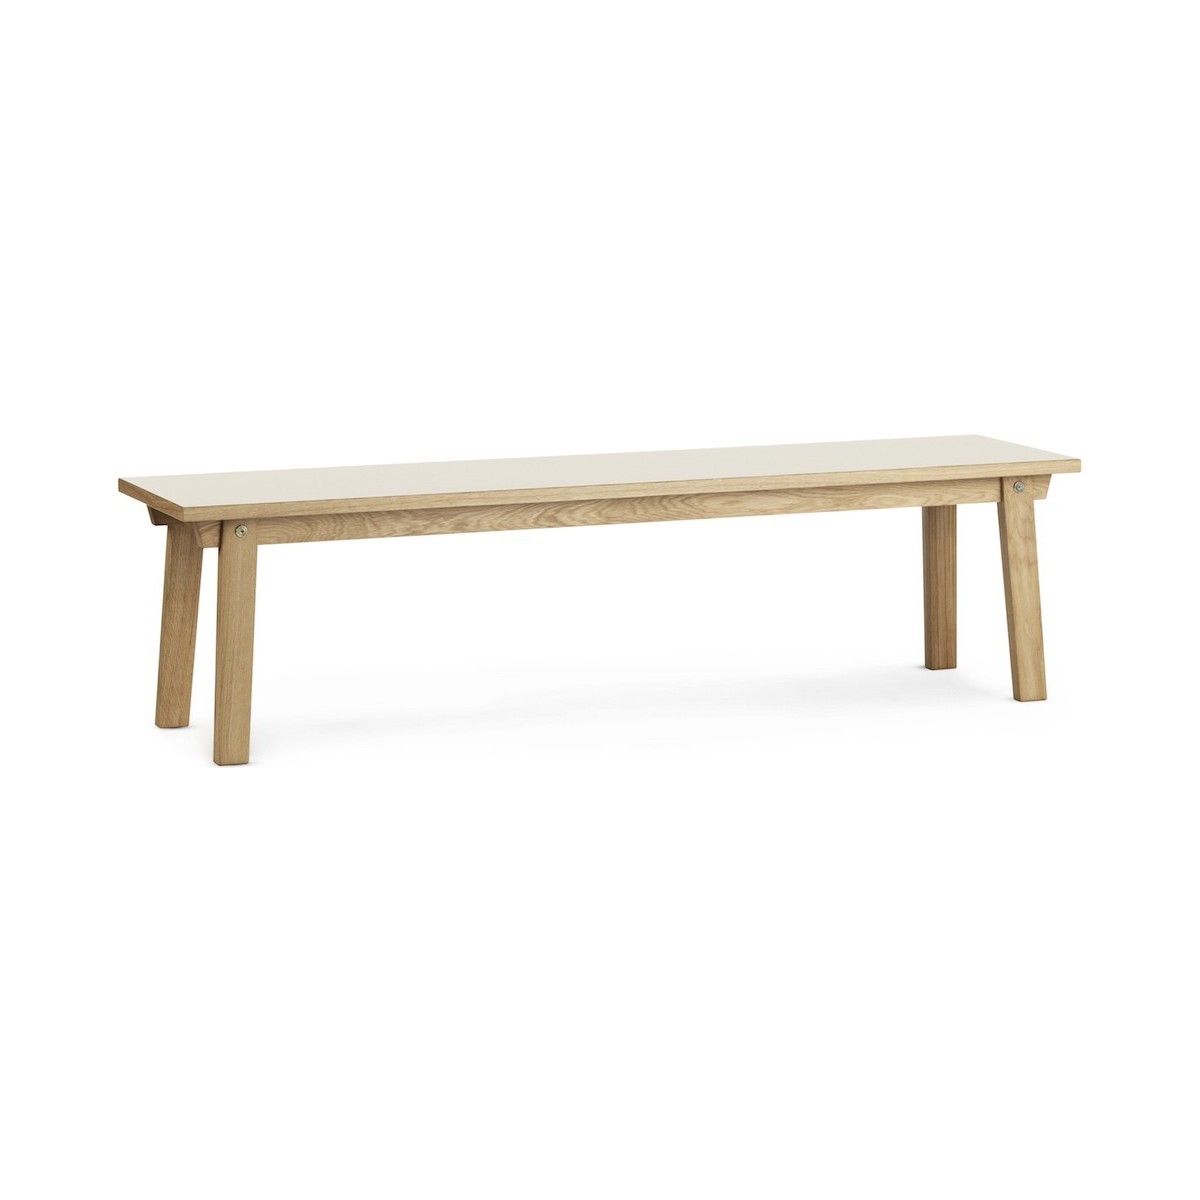 SOLD OUT creme - 38x160cm - Slice bench